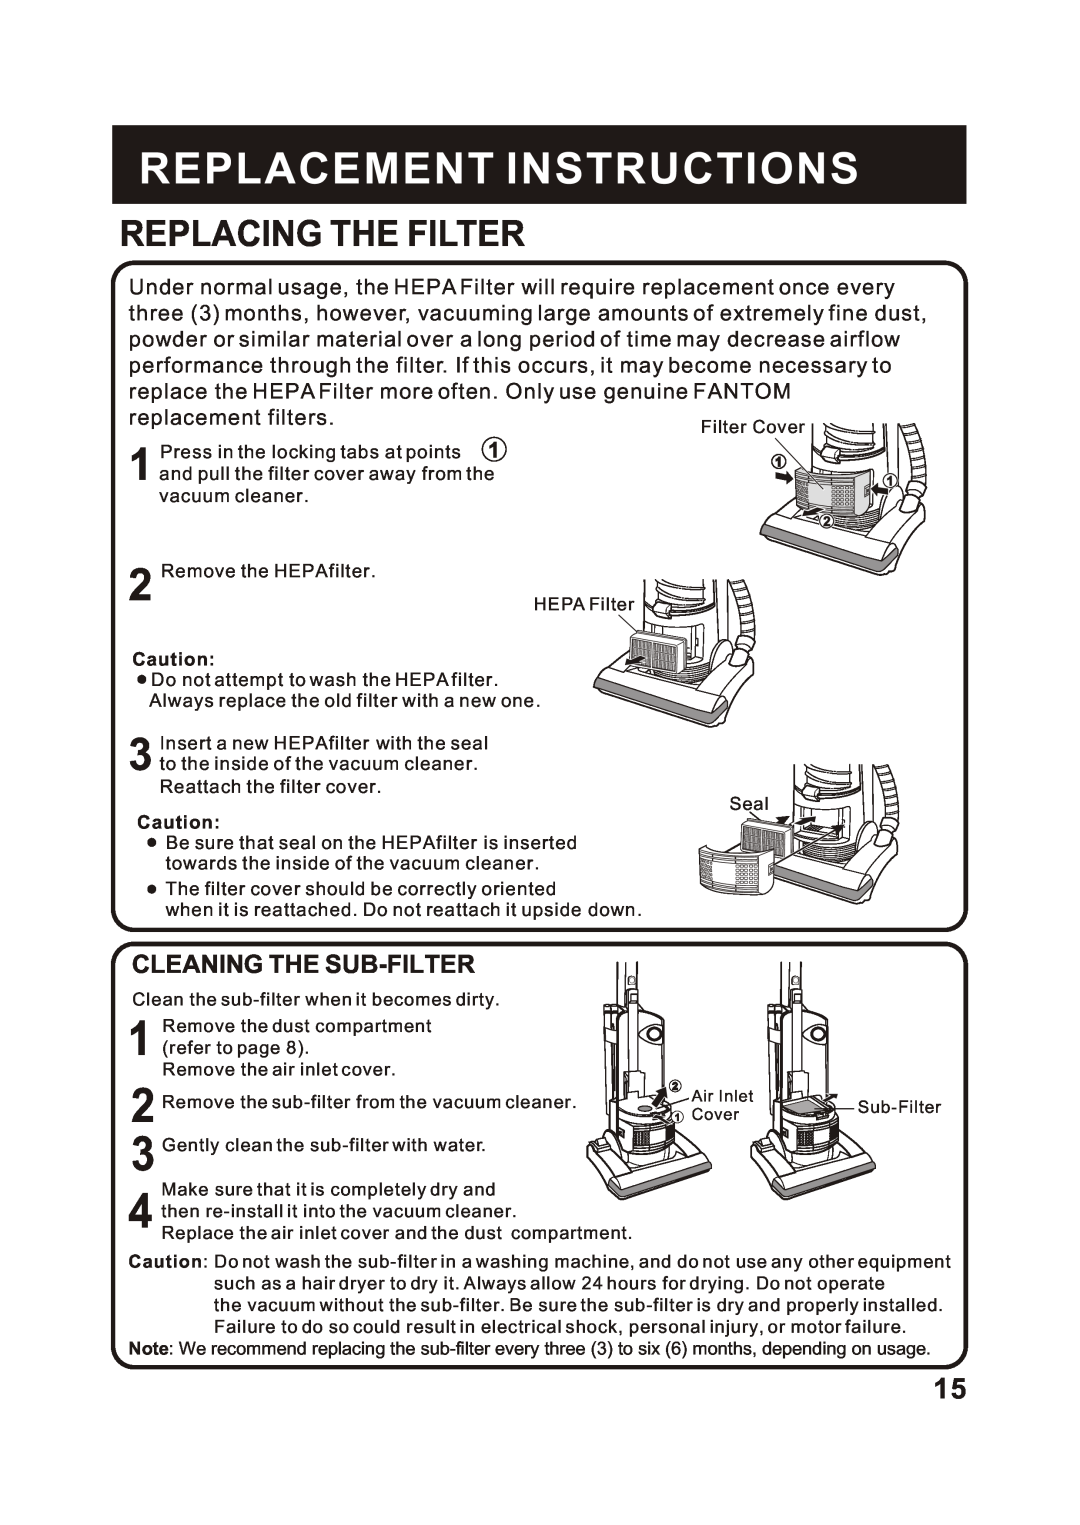 Fantom Vacuum FM741C instruction manual Replacing The Filter, Cleaning The Sub-Filter, Replacement Instructions 